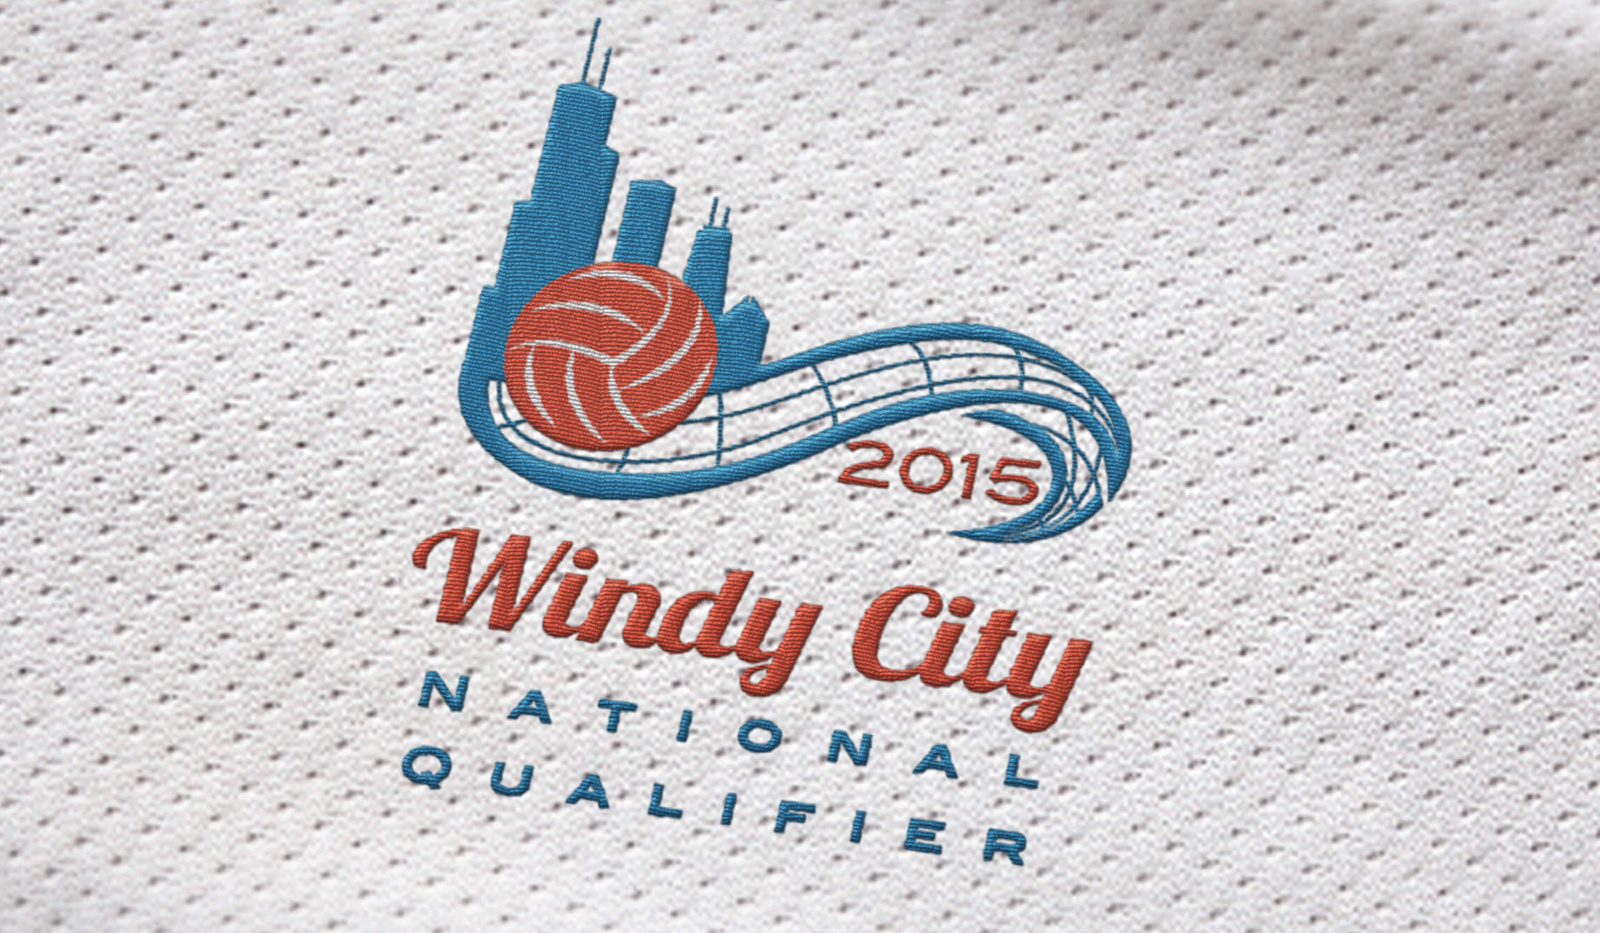 Event Logo Design In Use - Windy City National Qualifier